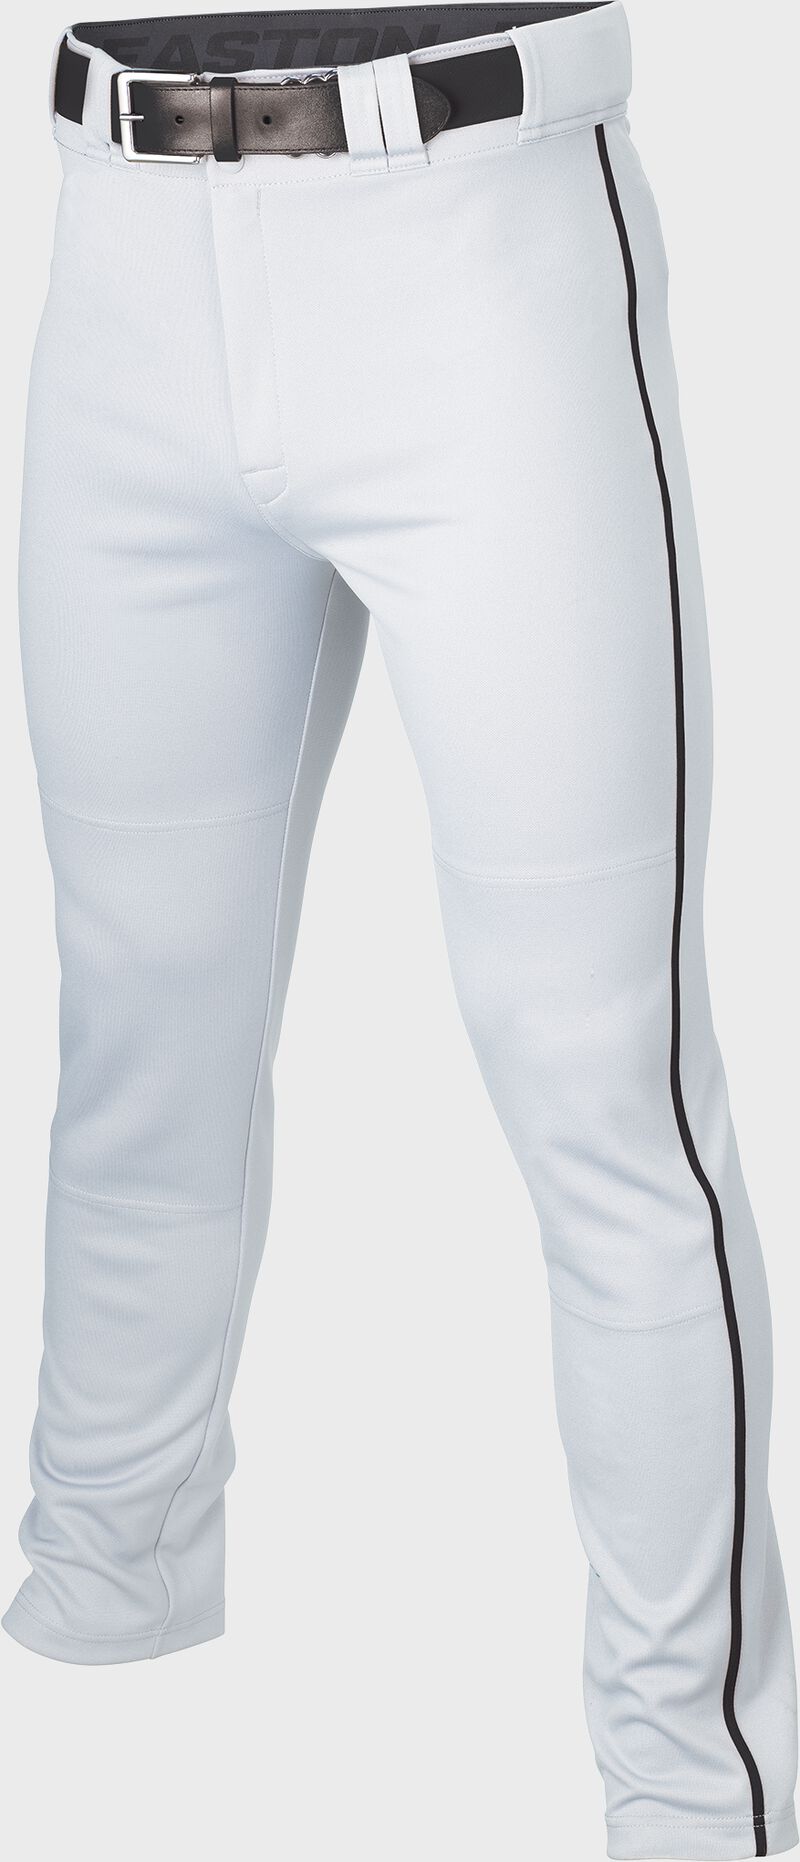 RIVAL+ PANT ADULT PIPED WHITE/BLACK XXL